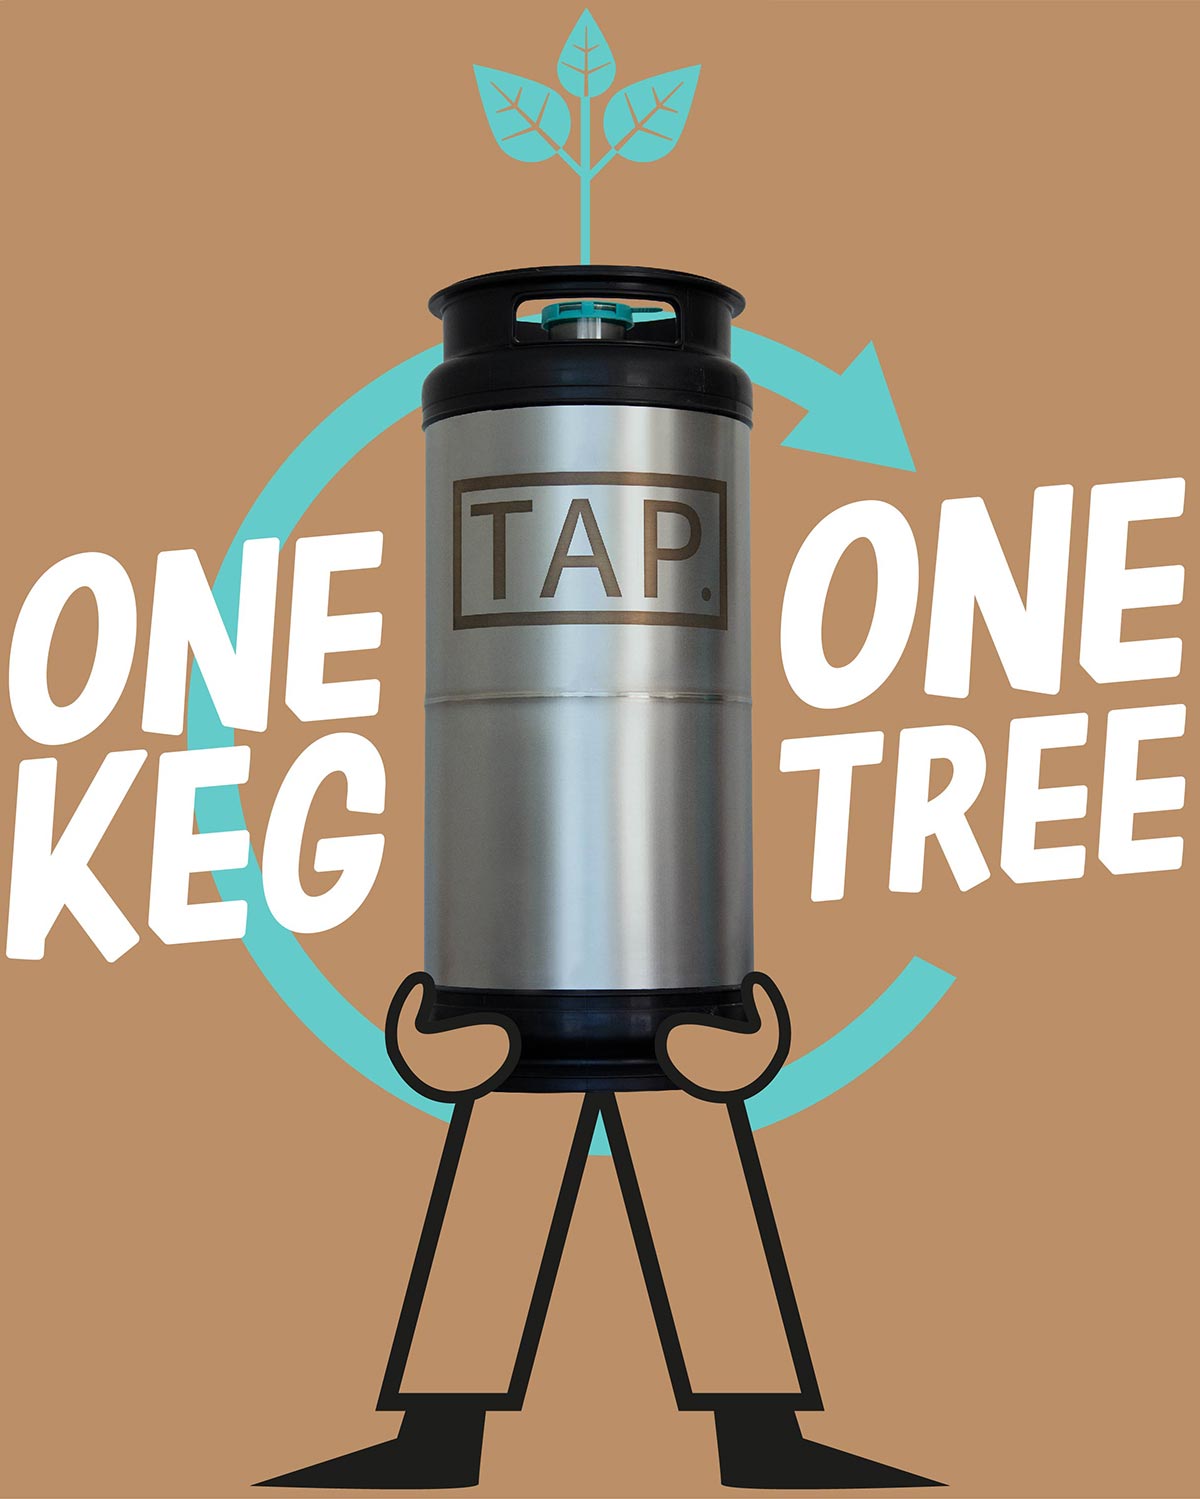 One keg equals one tree